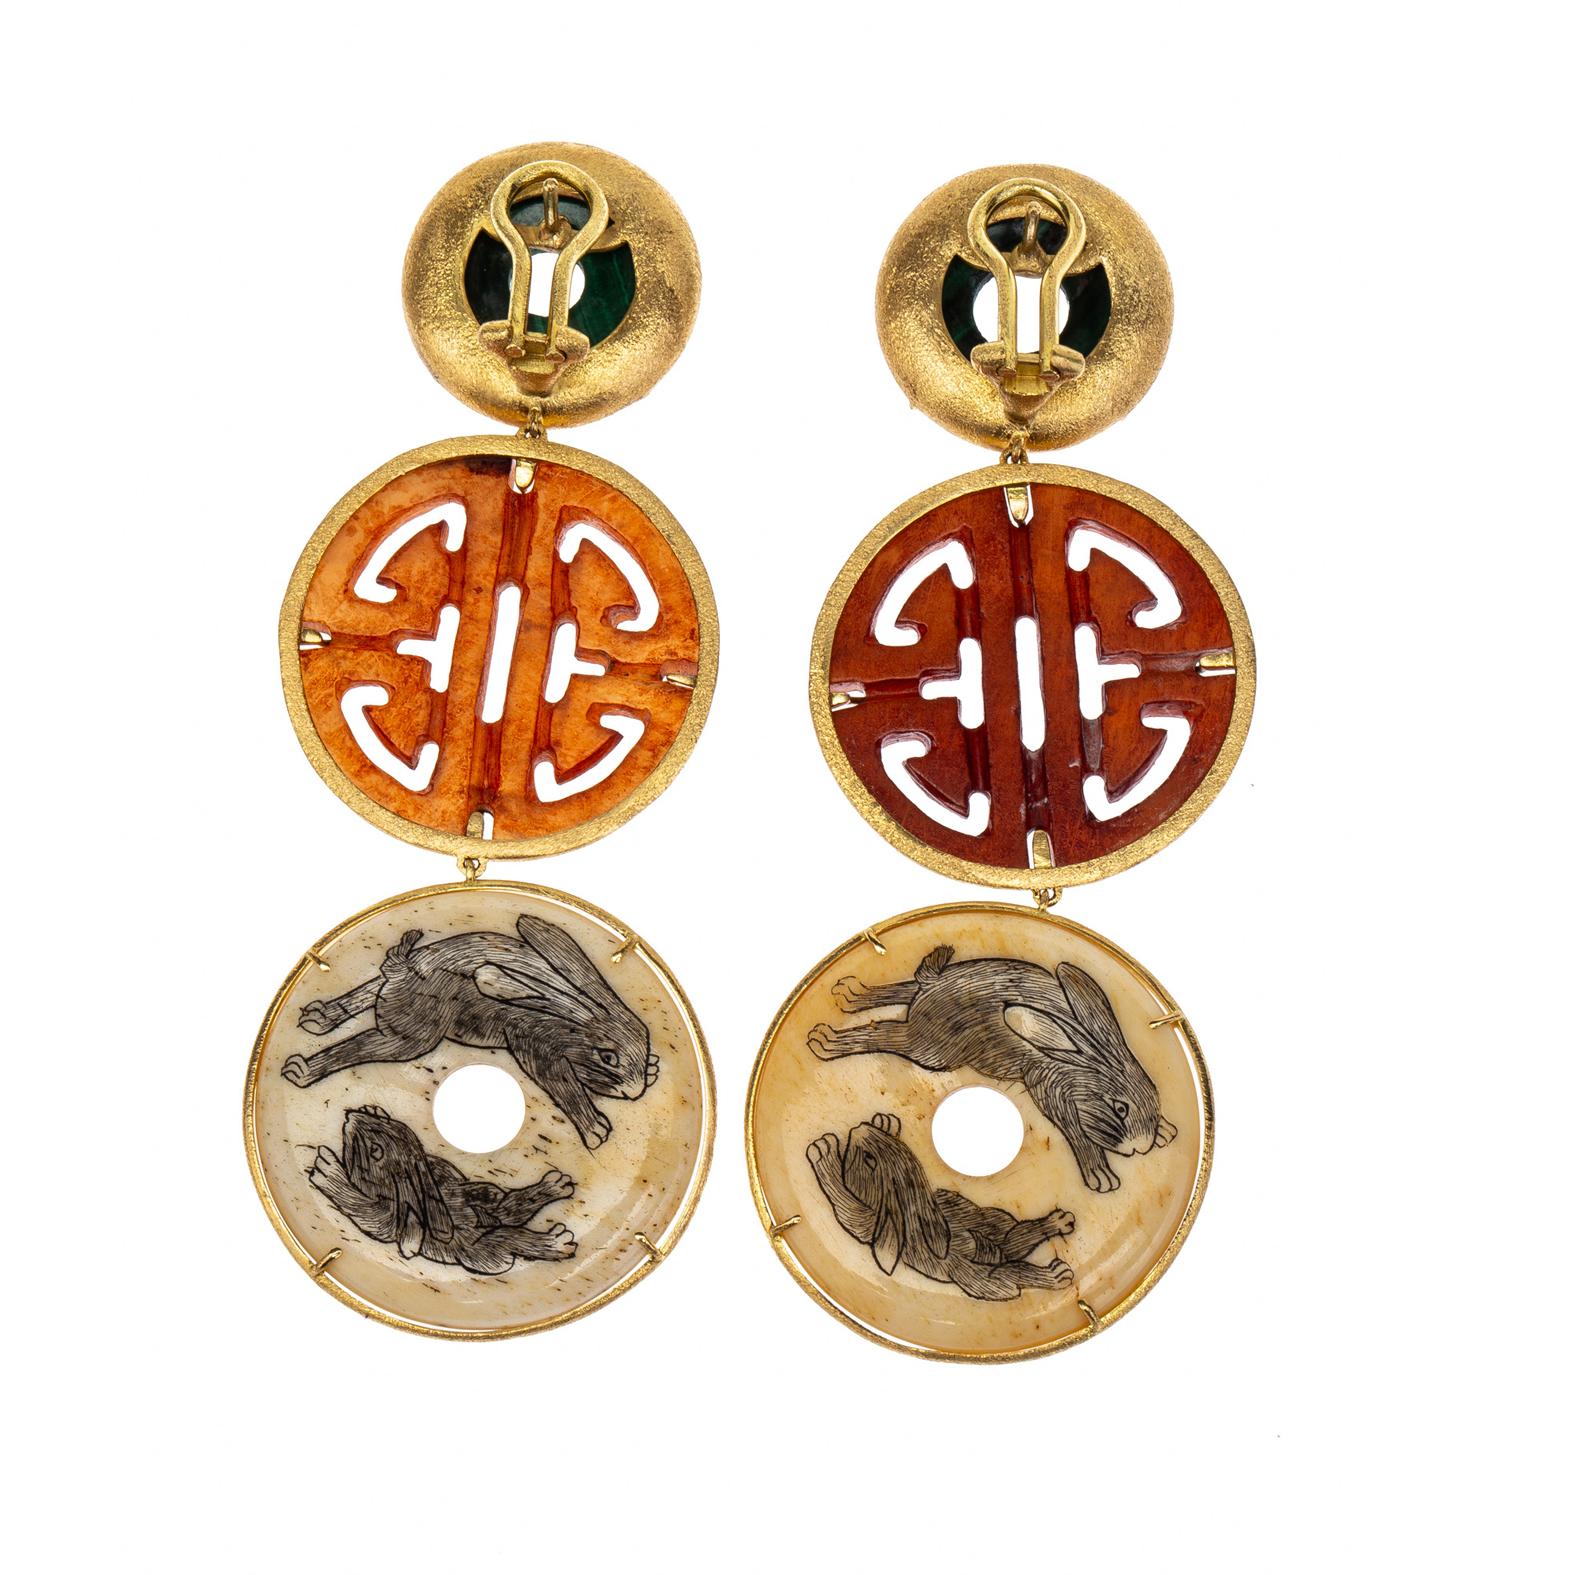 Antique Cinese Bi with carved Bucks, carved carnelian, malaquite 18 k Gold gr. 17,40.
All Giulia Colussi jewelry is new and has never been previously owned or worn. Each item will arrive at your door beautifully gift wrapped in our boxes, put inside